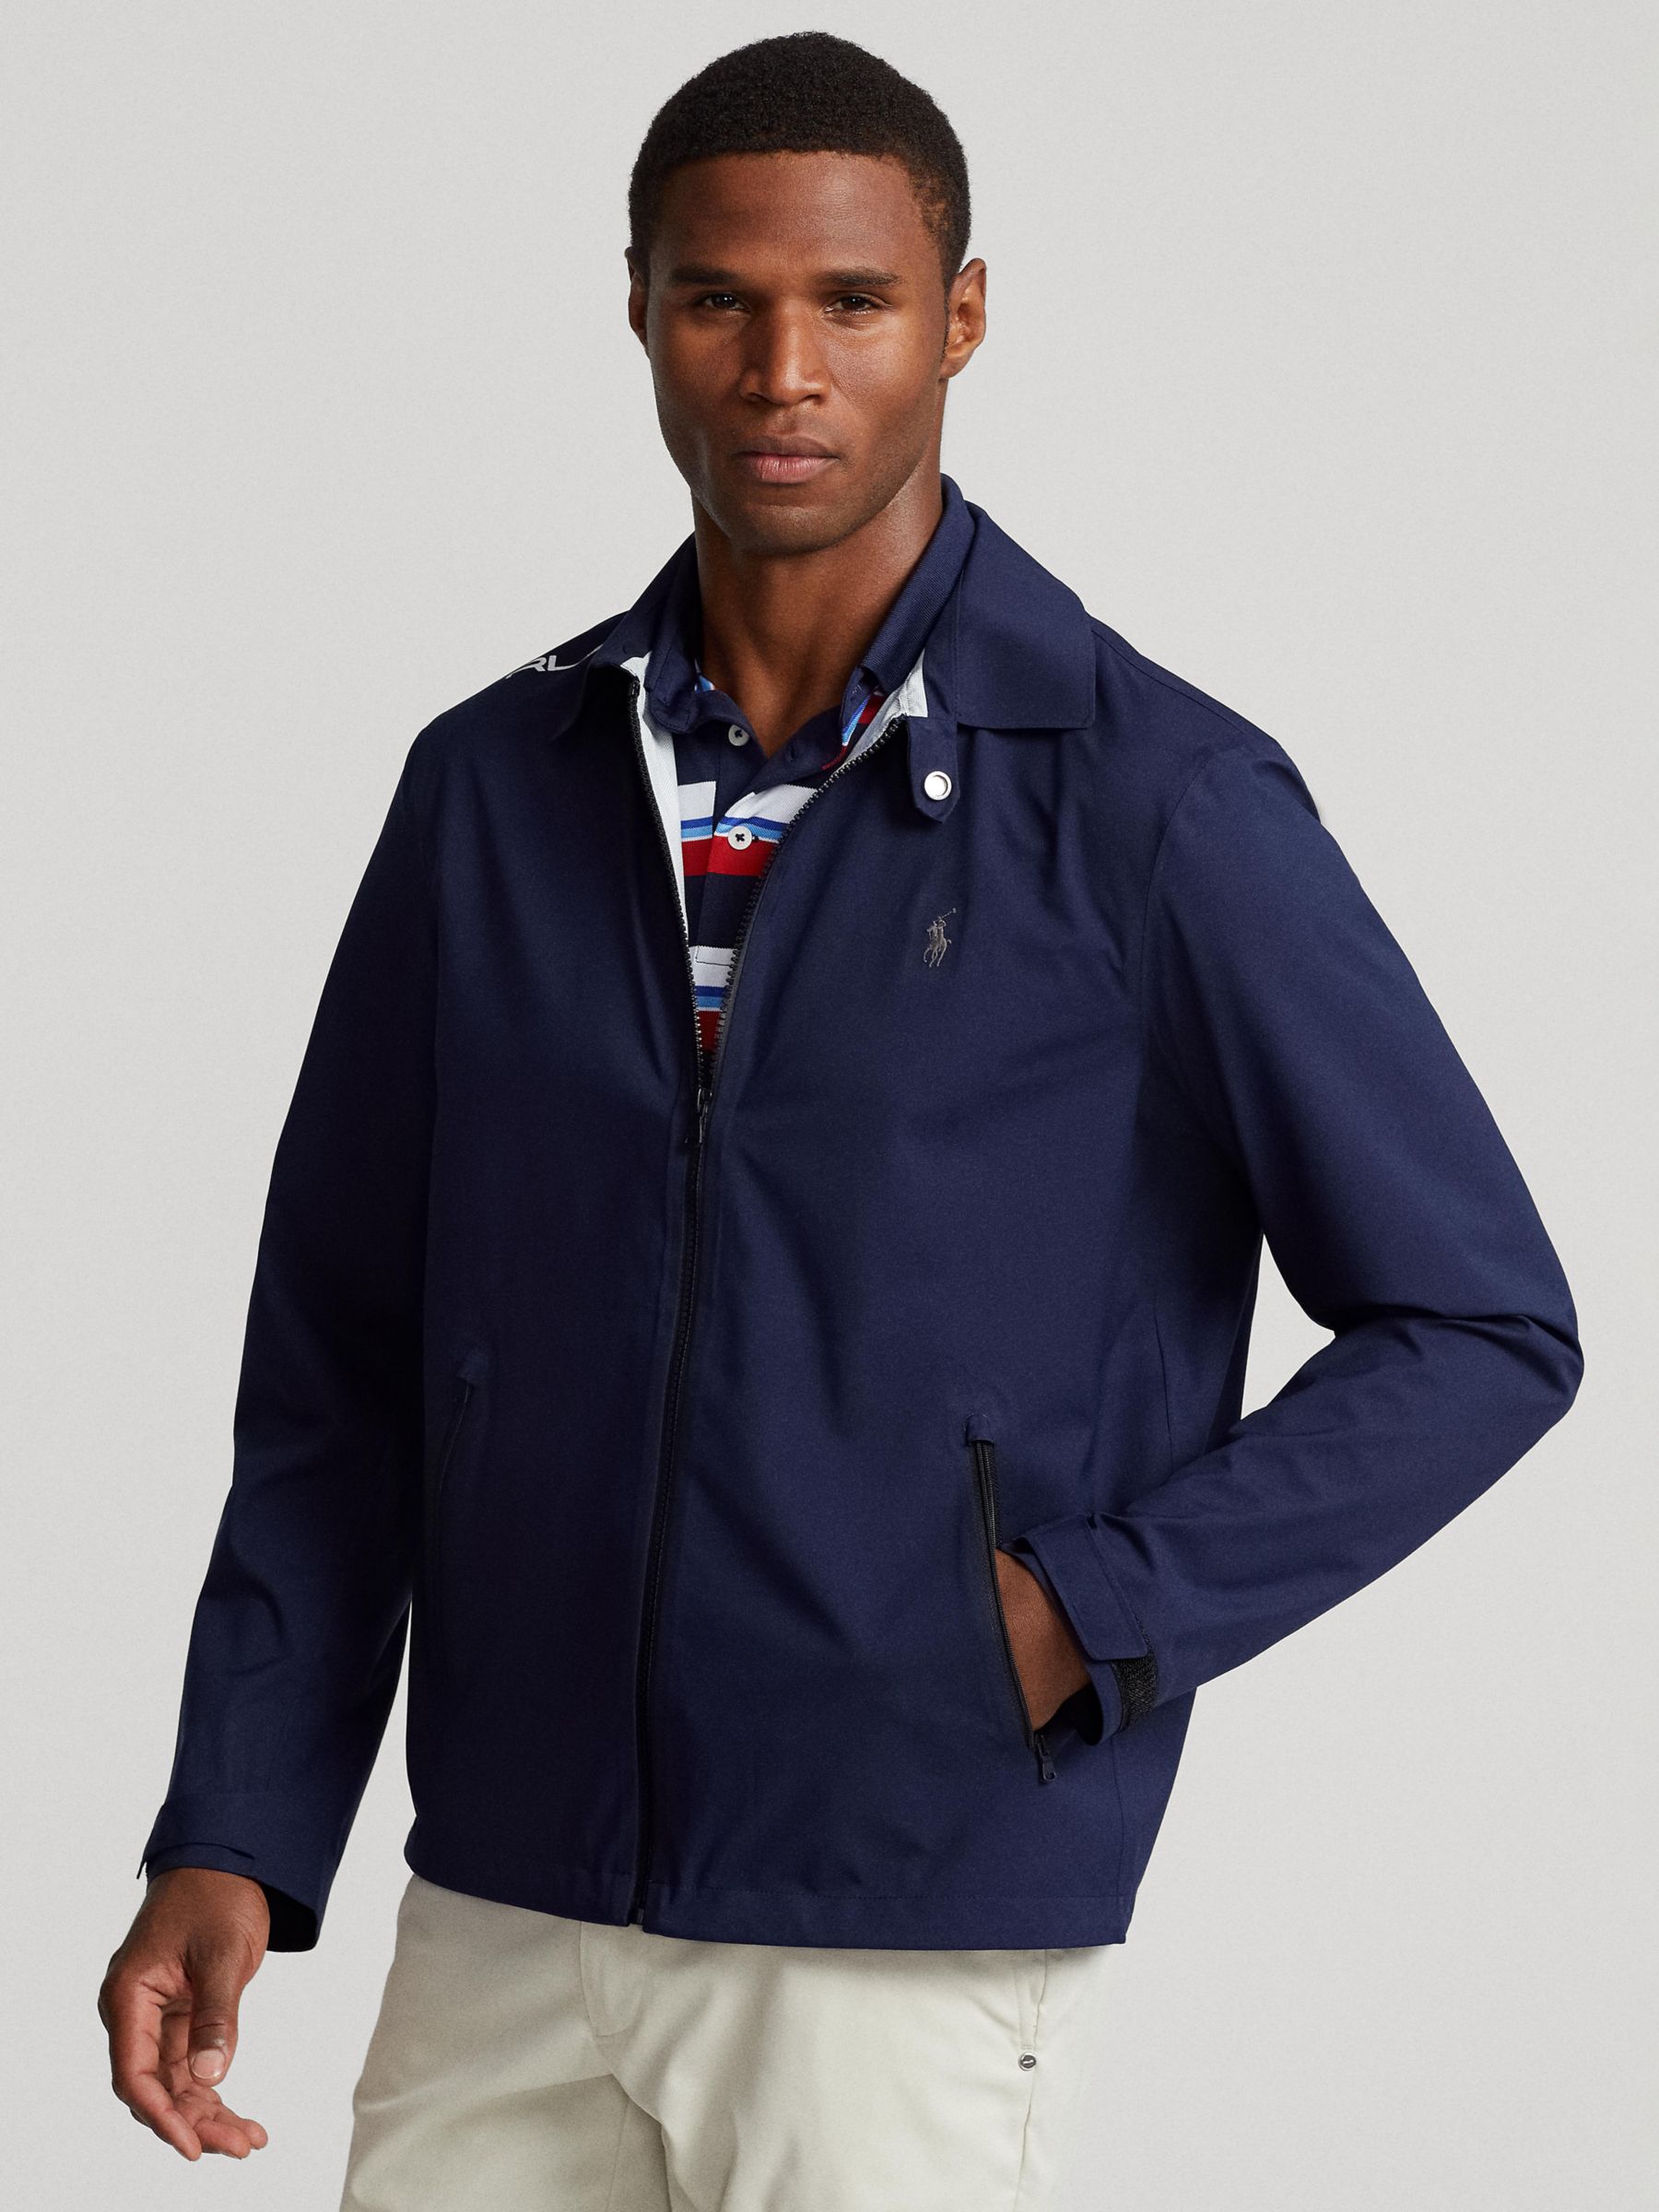 Polo Golf by Ralph Lauren RLX Doubled Lined Windbreaker, French Navy, S